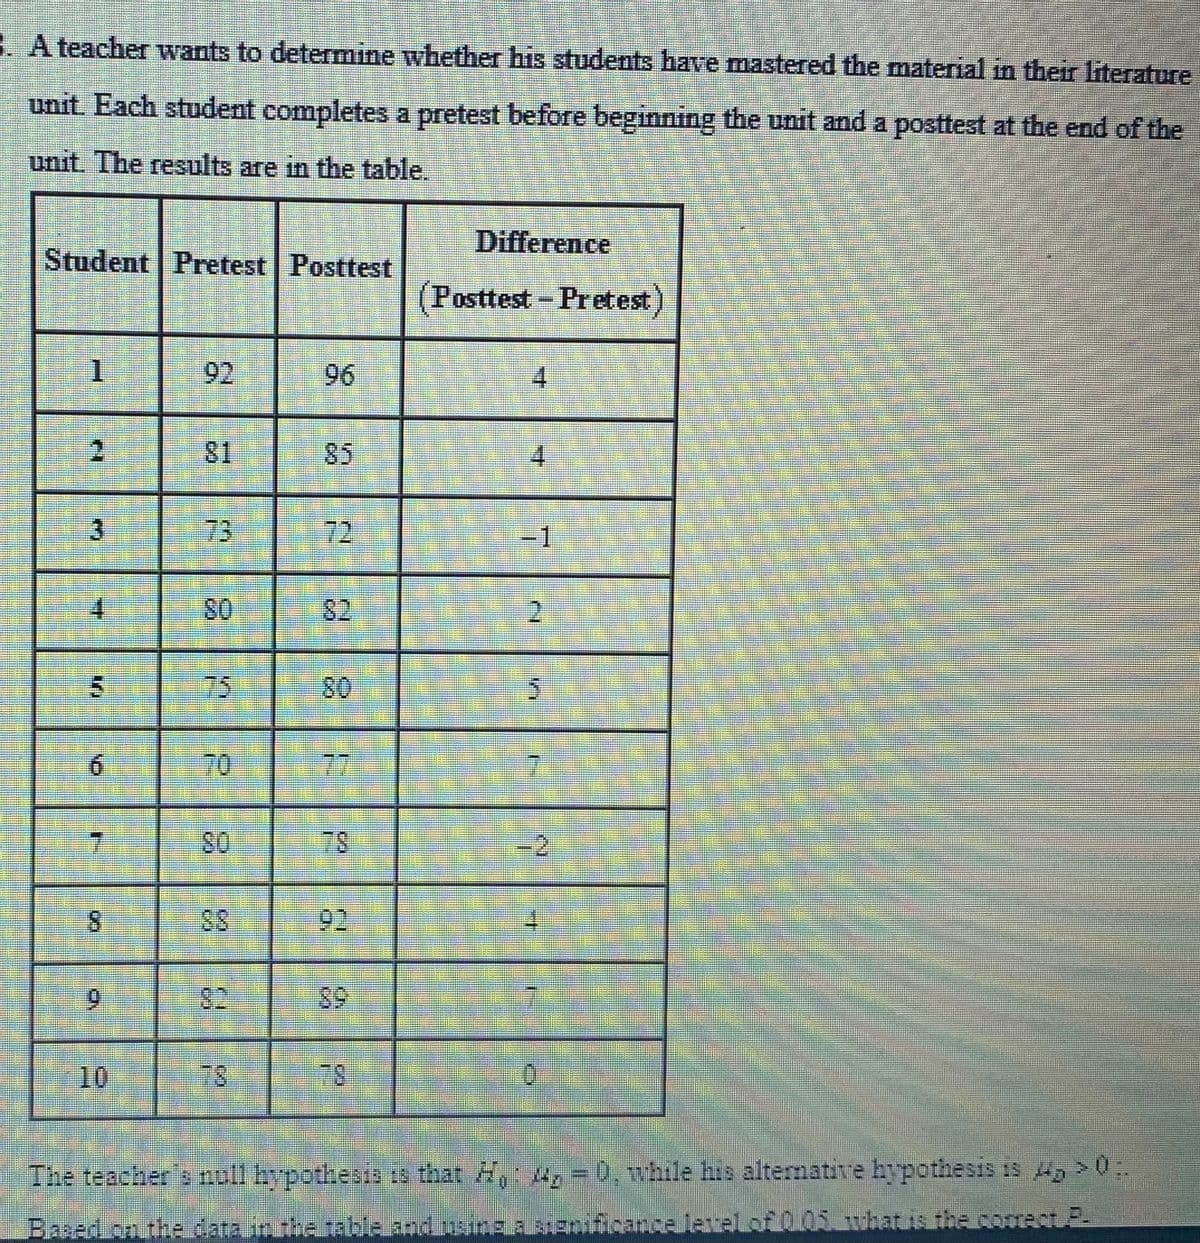 A teacher wants to determine whether his students have mastered the material in their literature
unit. Each student completes a pretest before beginning the unit and a posttest at the end of the
unit. The results are in the table.
Student Pretest Posttest
1
FI
2
13
21
15
6
8
9
NEX
10
92
GRY
70
80
P
15)
ON
2
8
J
2
CA
Difference
(Posttest - Pretest)
4
4
-1
2
10
The teacher's null
hypothesis
is that H = 0, while his alternative hypothesis is , > 0:
Based on the data in the table and using a significance level of 0.05. what is the correct P.